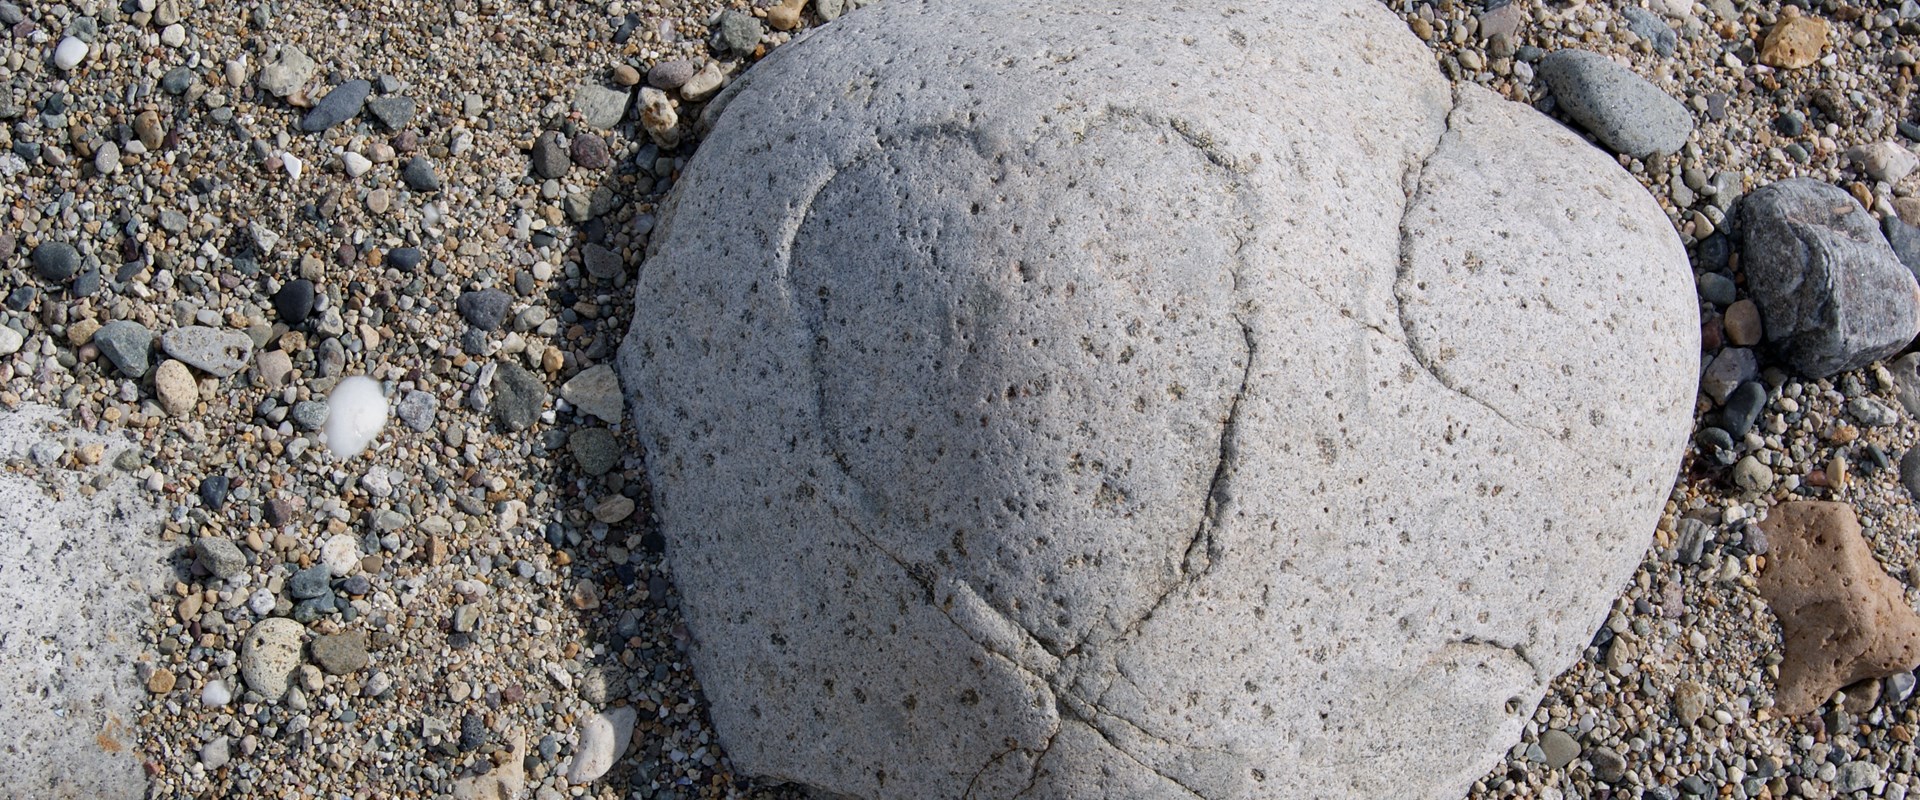 A stone on a beach with a heart shape etched naturally by the erosion of weather